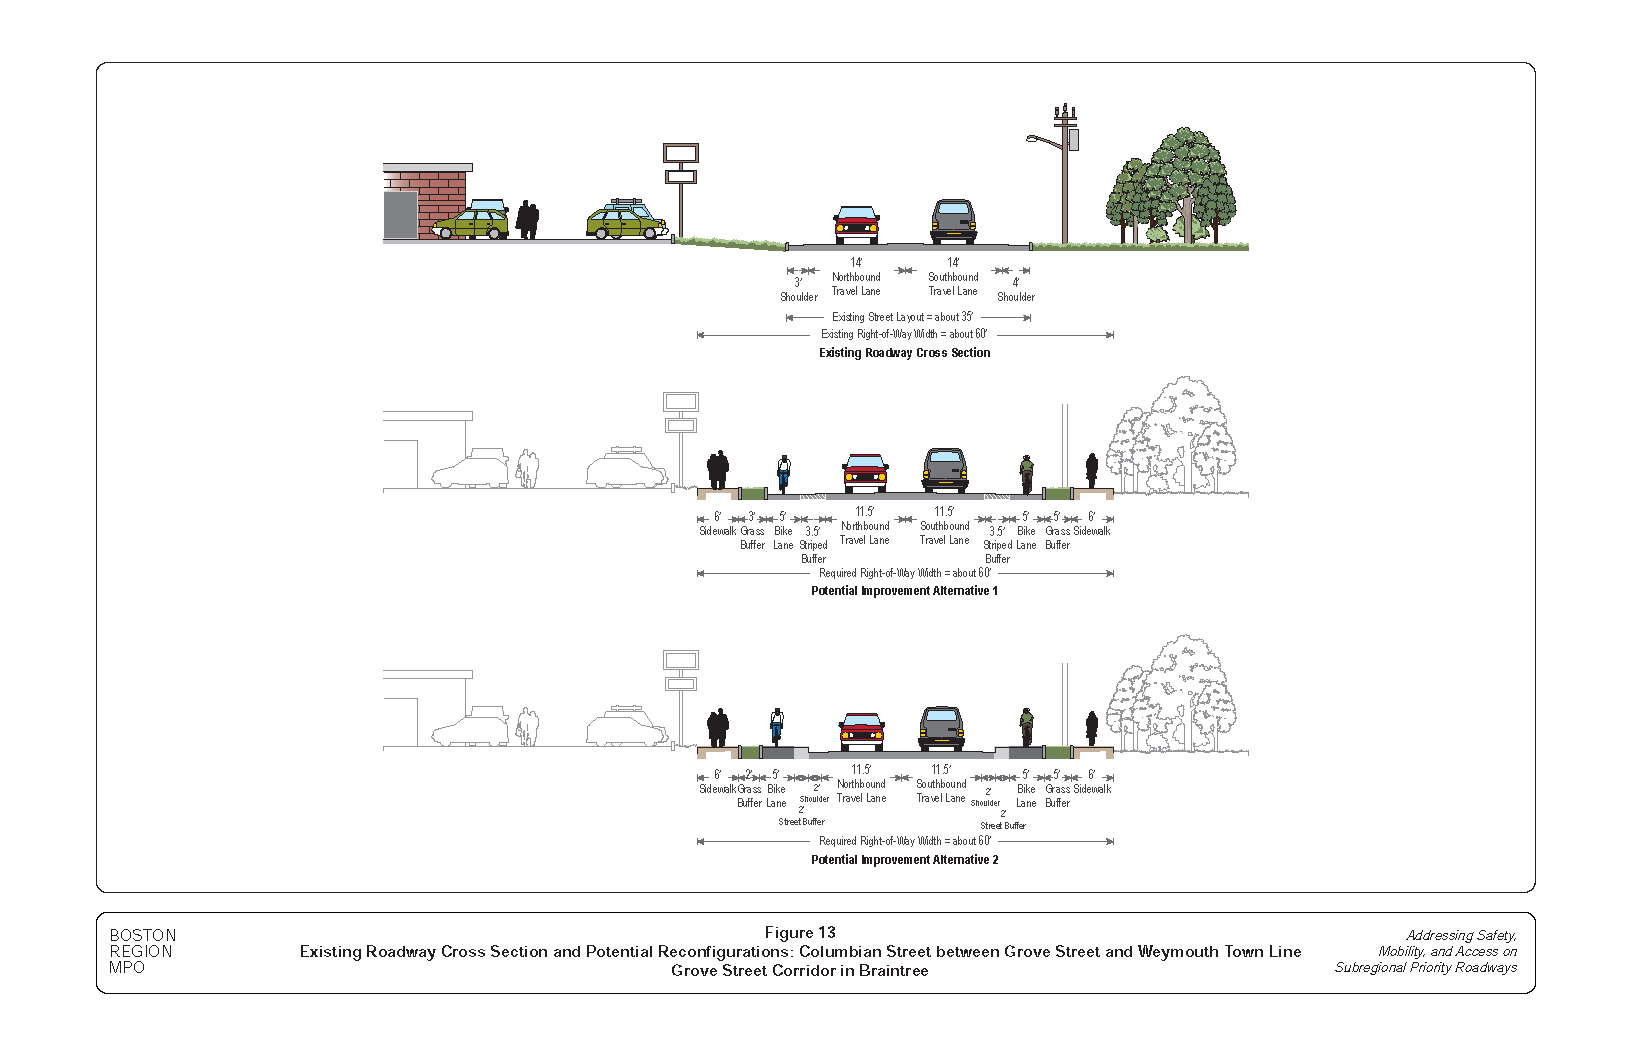 This figure shows the existing roadway cross section of Columbian Street between Grove Street and Weymouth Town Line and potential reconfiguration alternatives to accommodate all users of the roadway, including people who walk and bike.